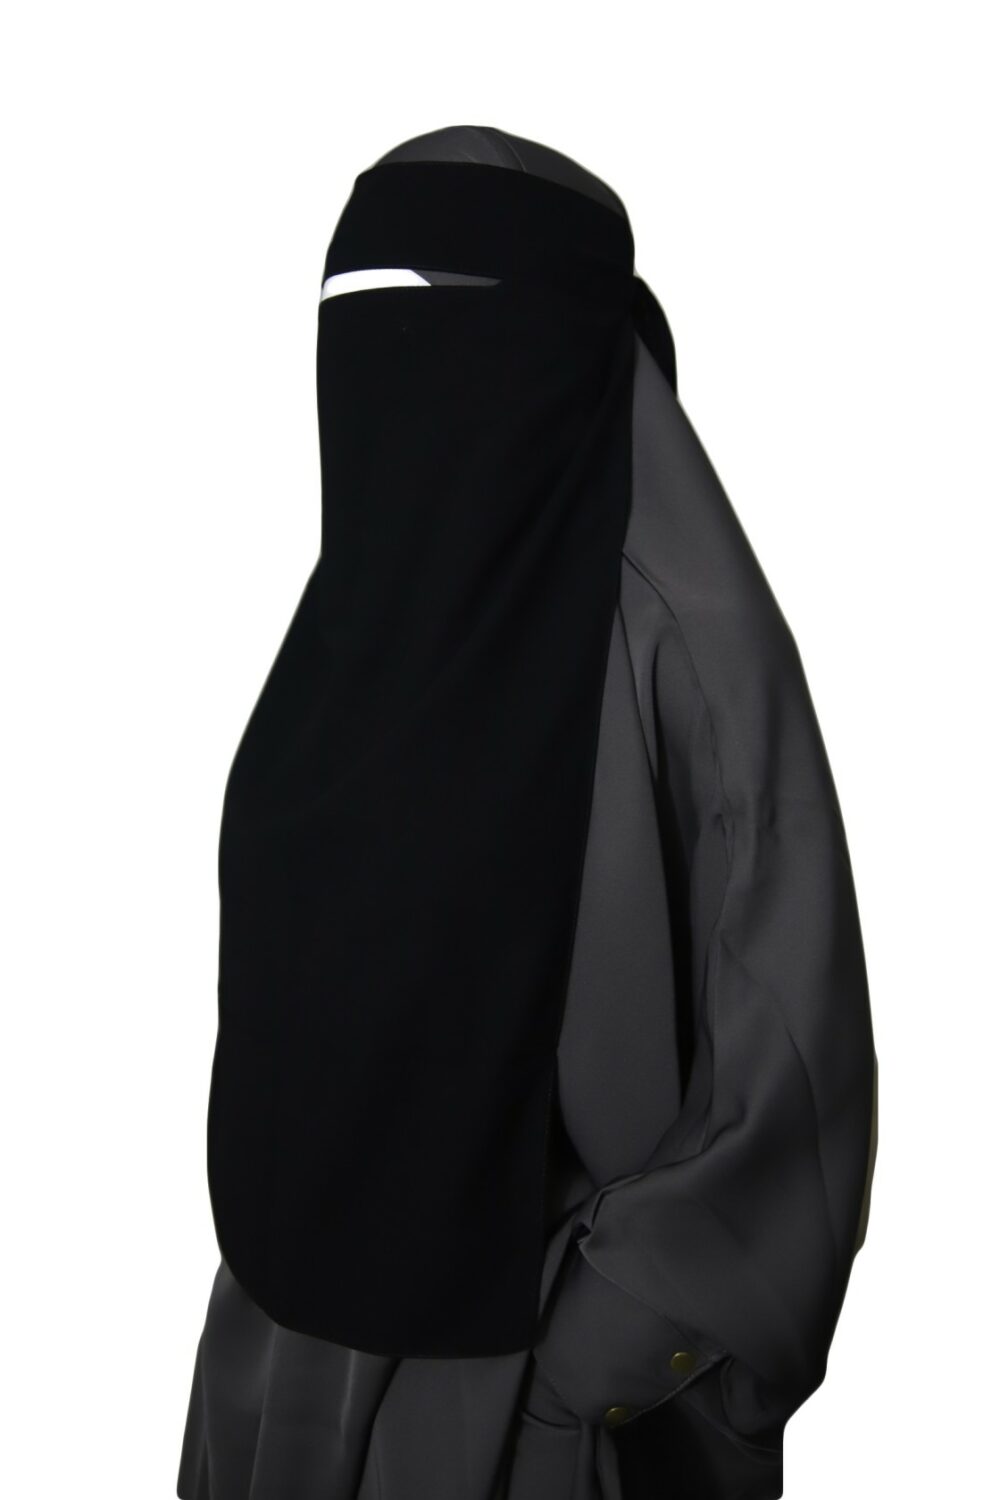 We have many niqab for sale, choose from different colors.